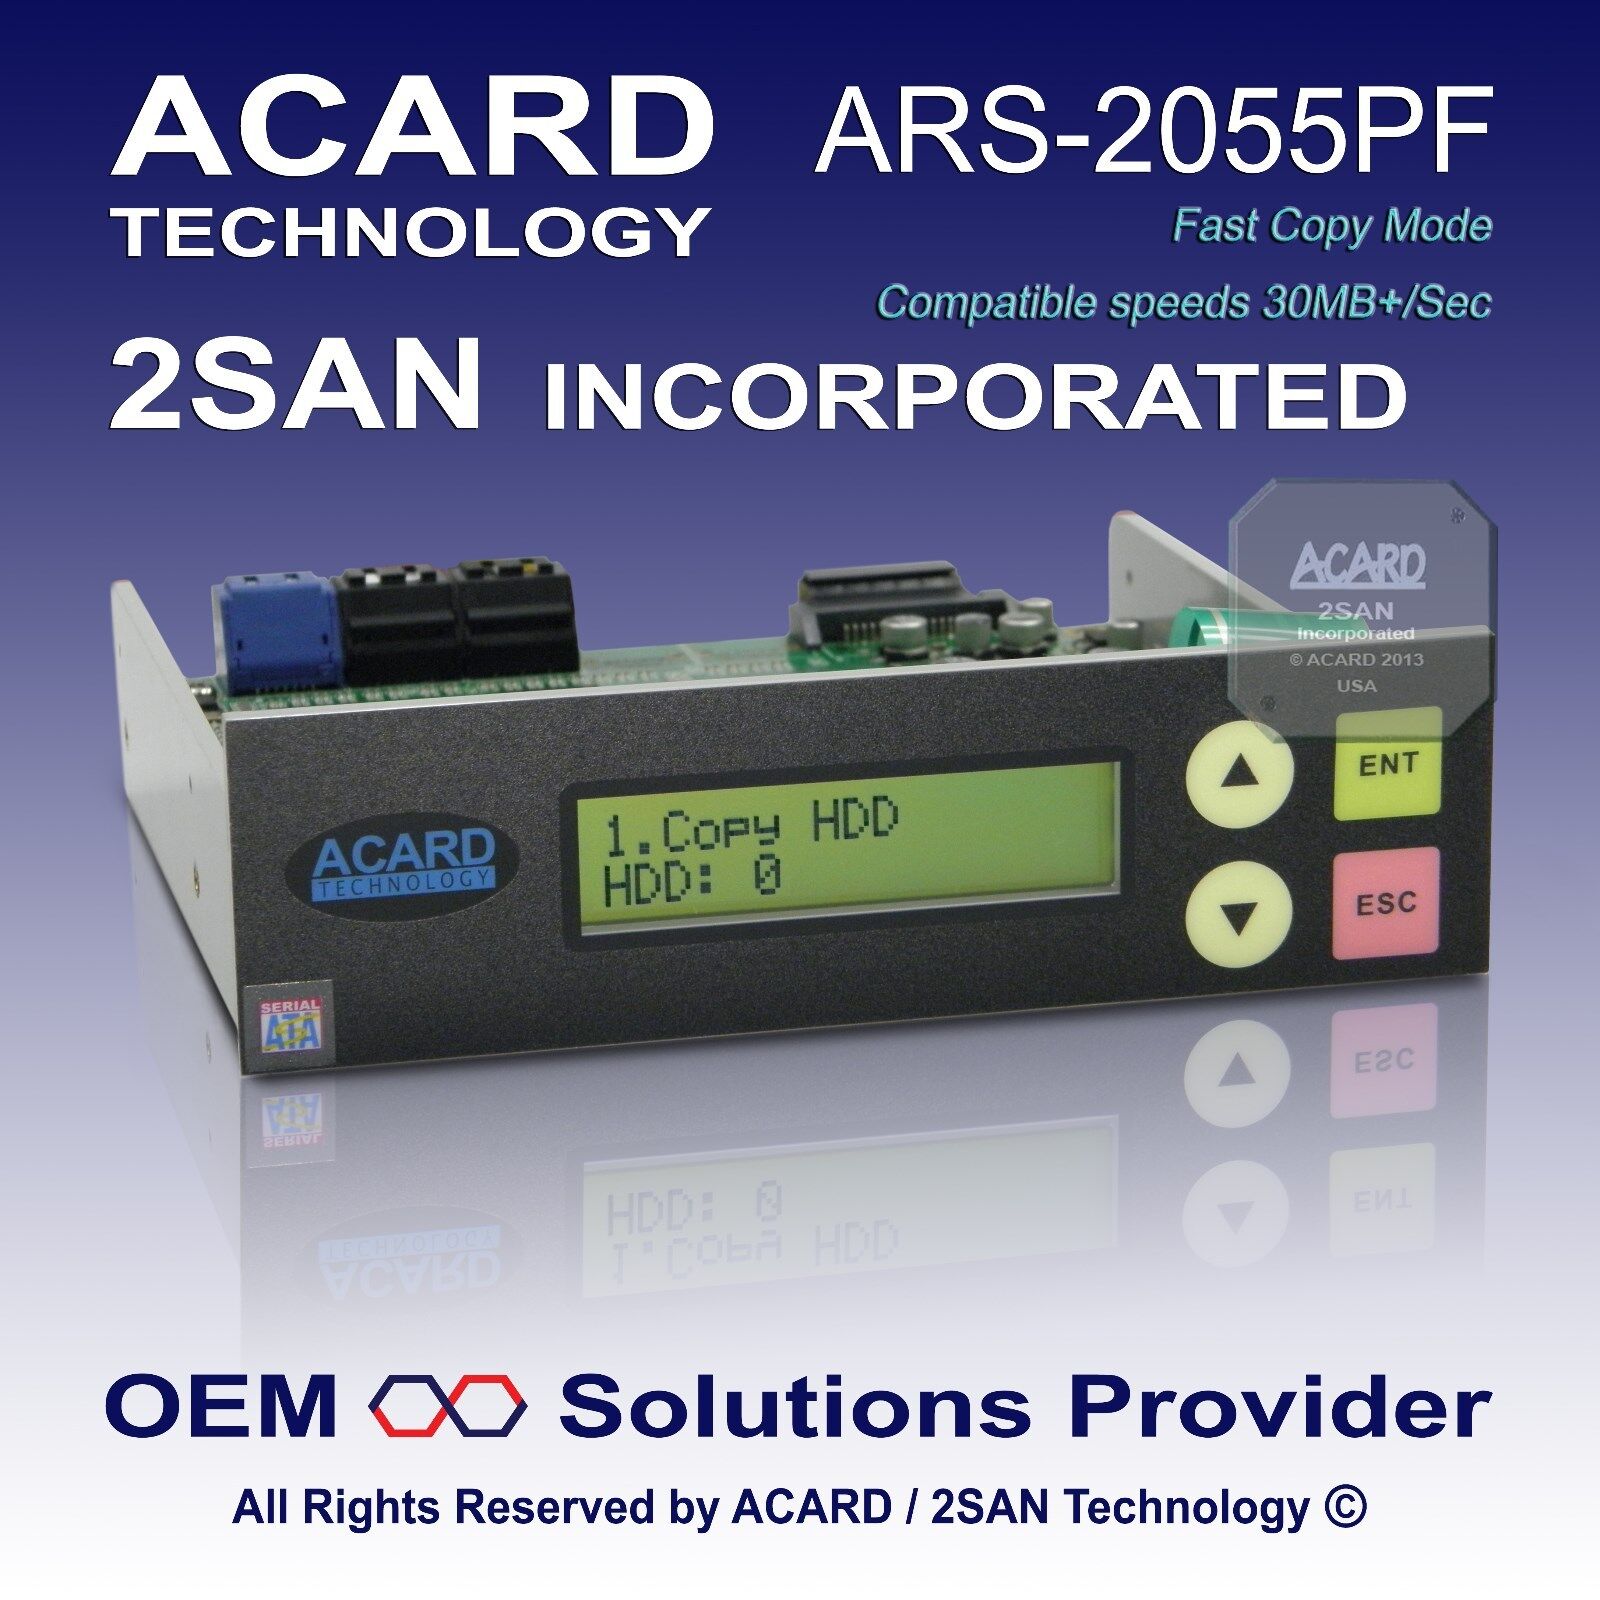 ACARD ARS-2055PF 1-to-5 SATA HDD/SSD/DOM Duplicator Controller (30MB/Sec)